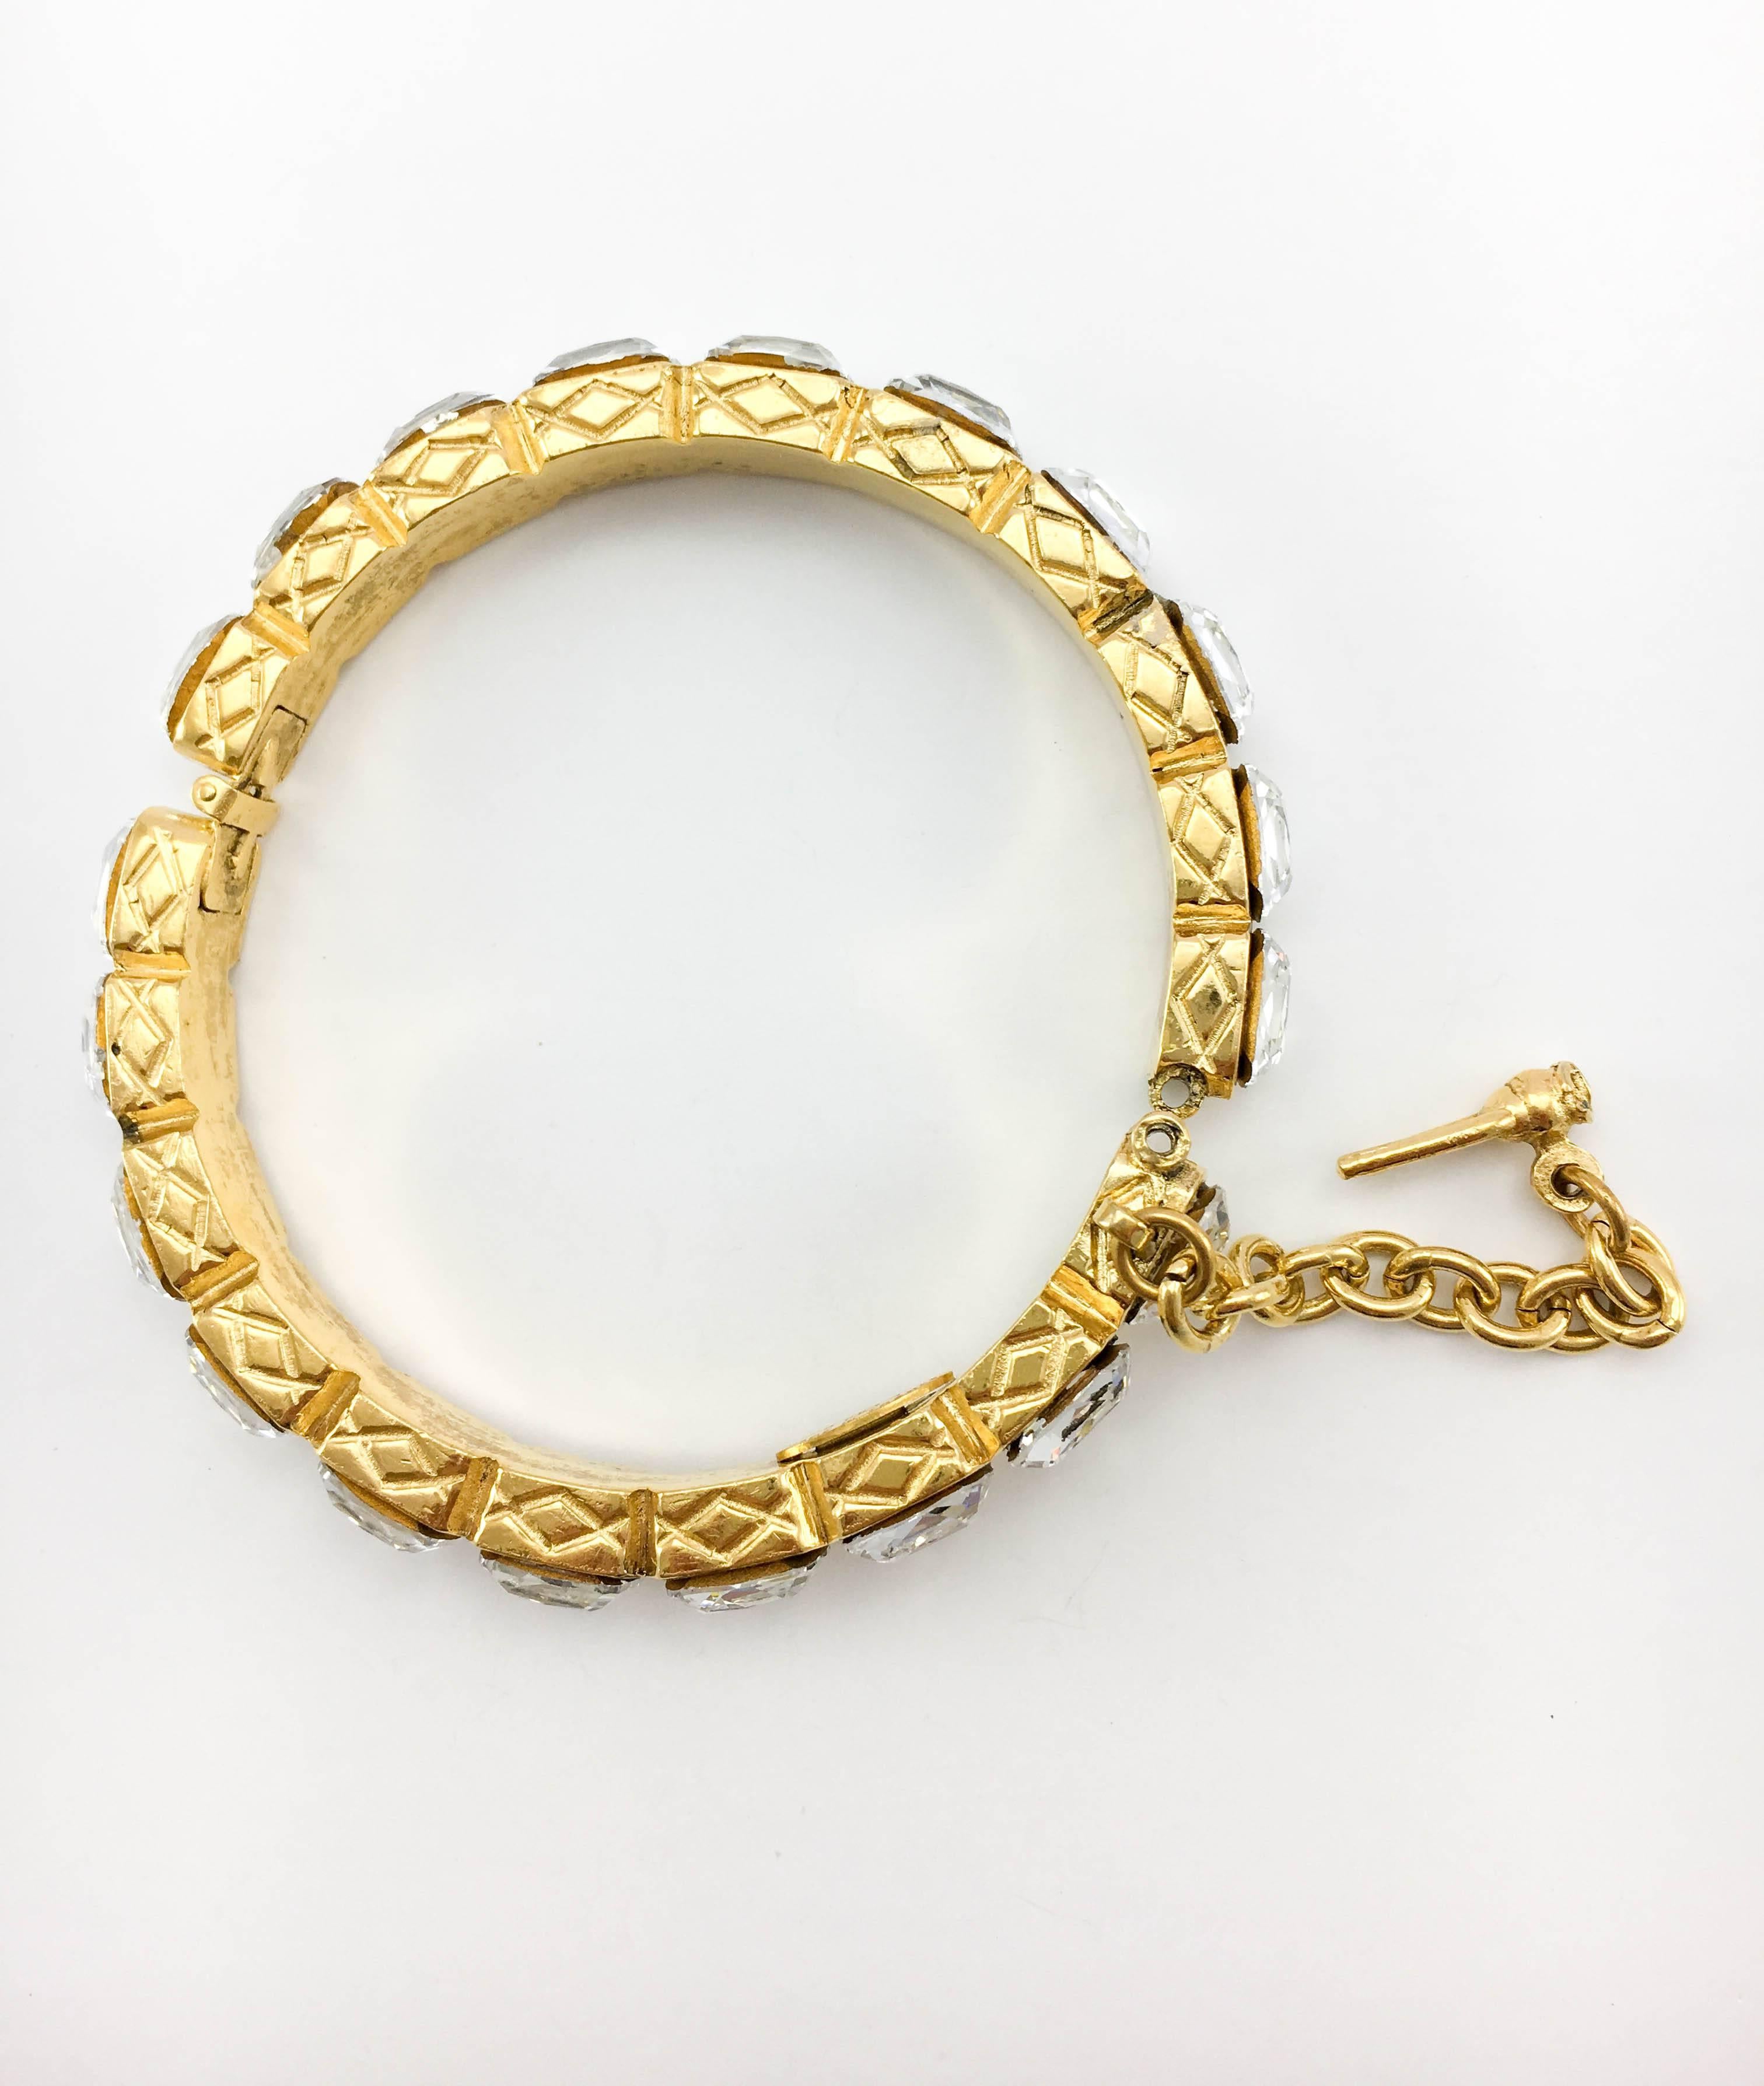 1986 Chanel Gold-Plated Quilted Bracelet Embellished With Crystals 3